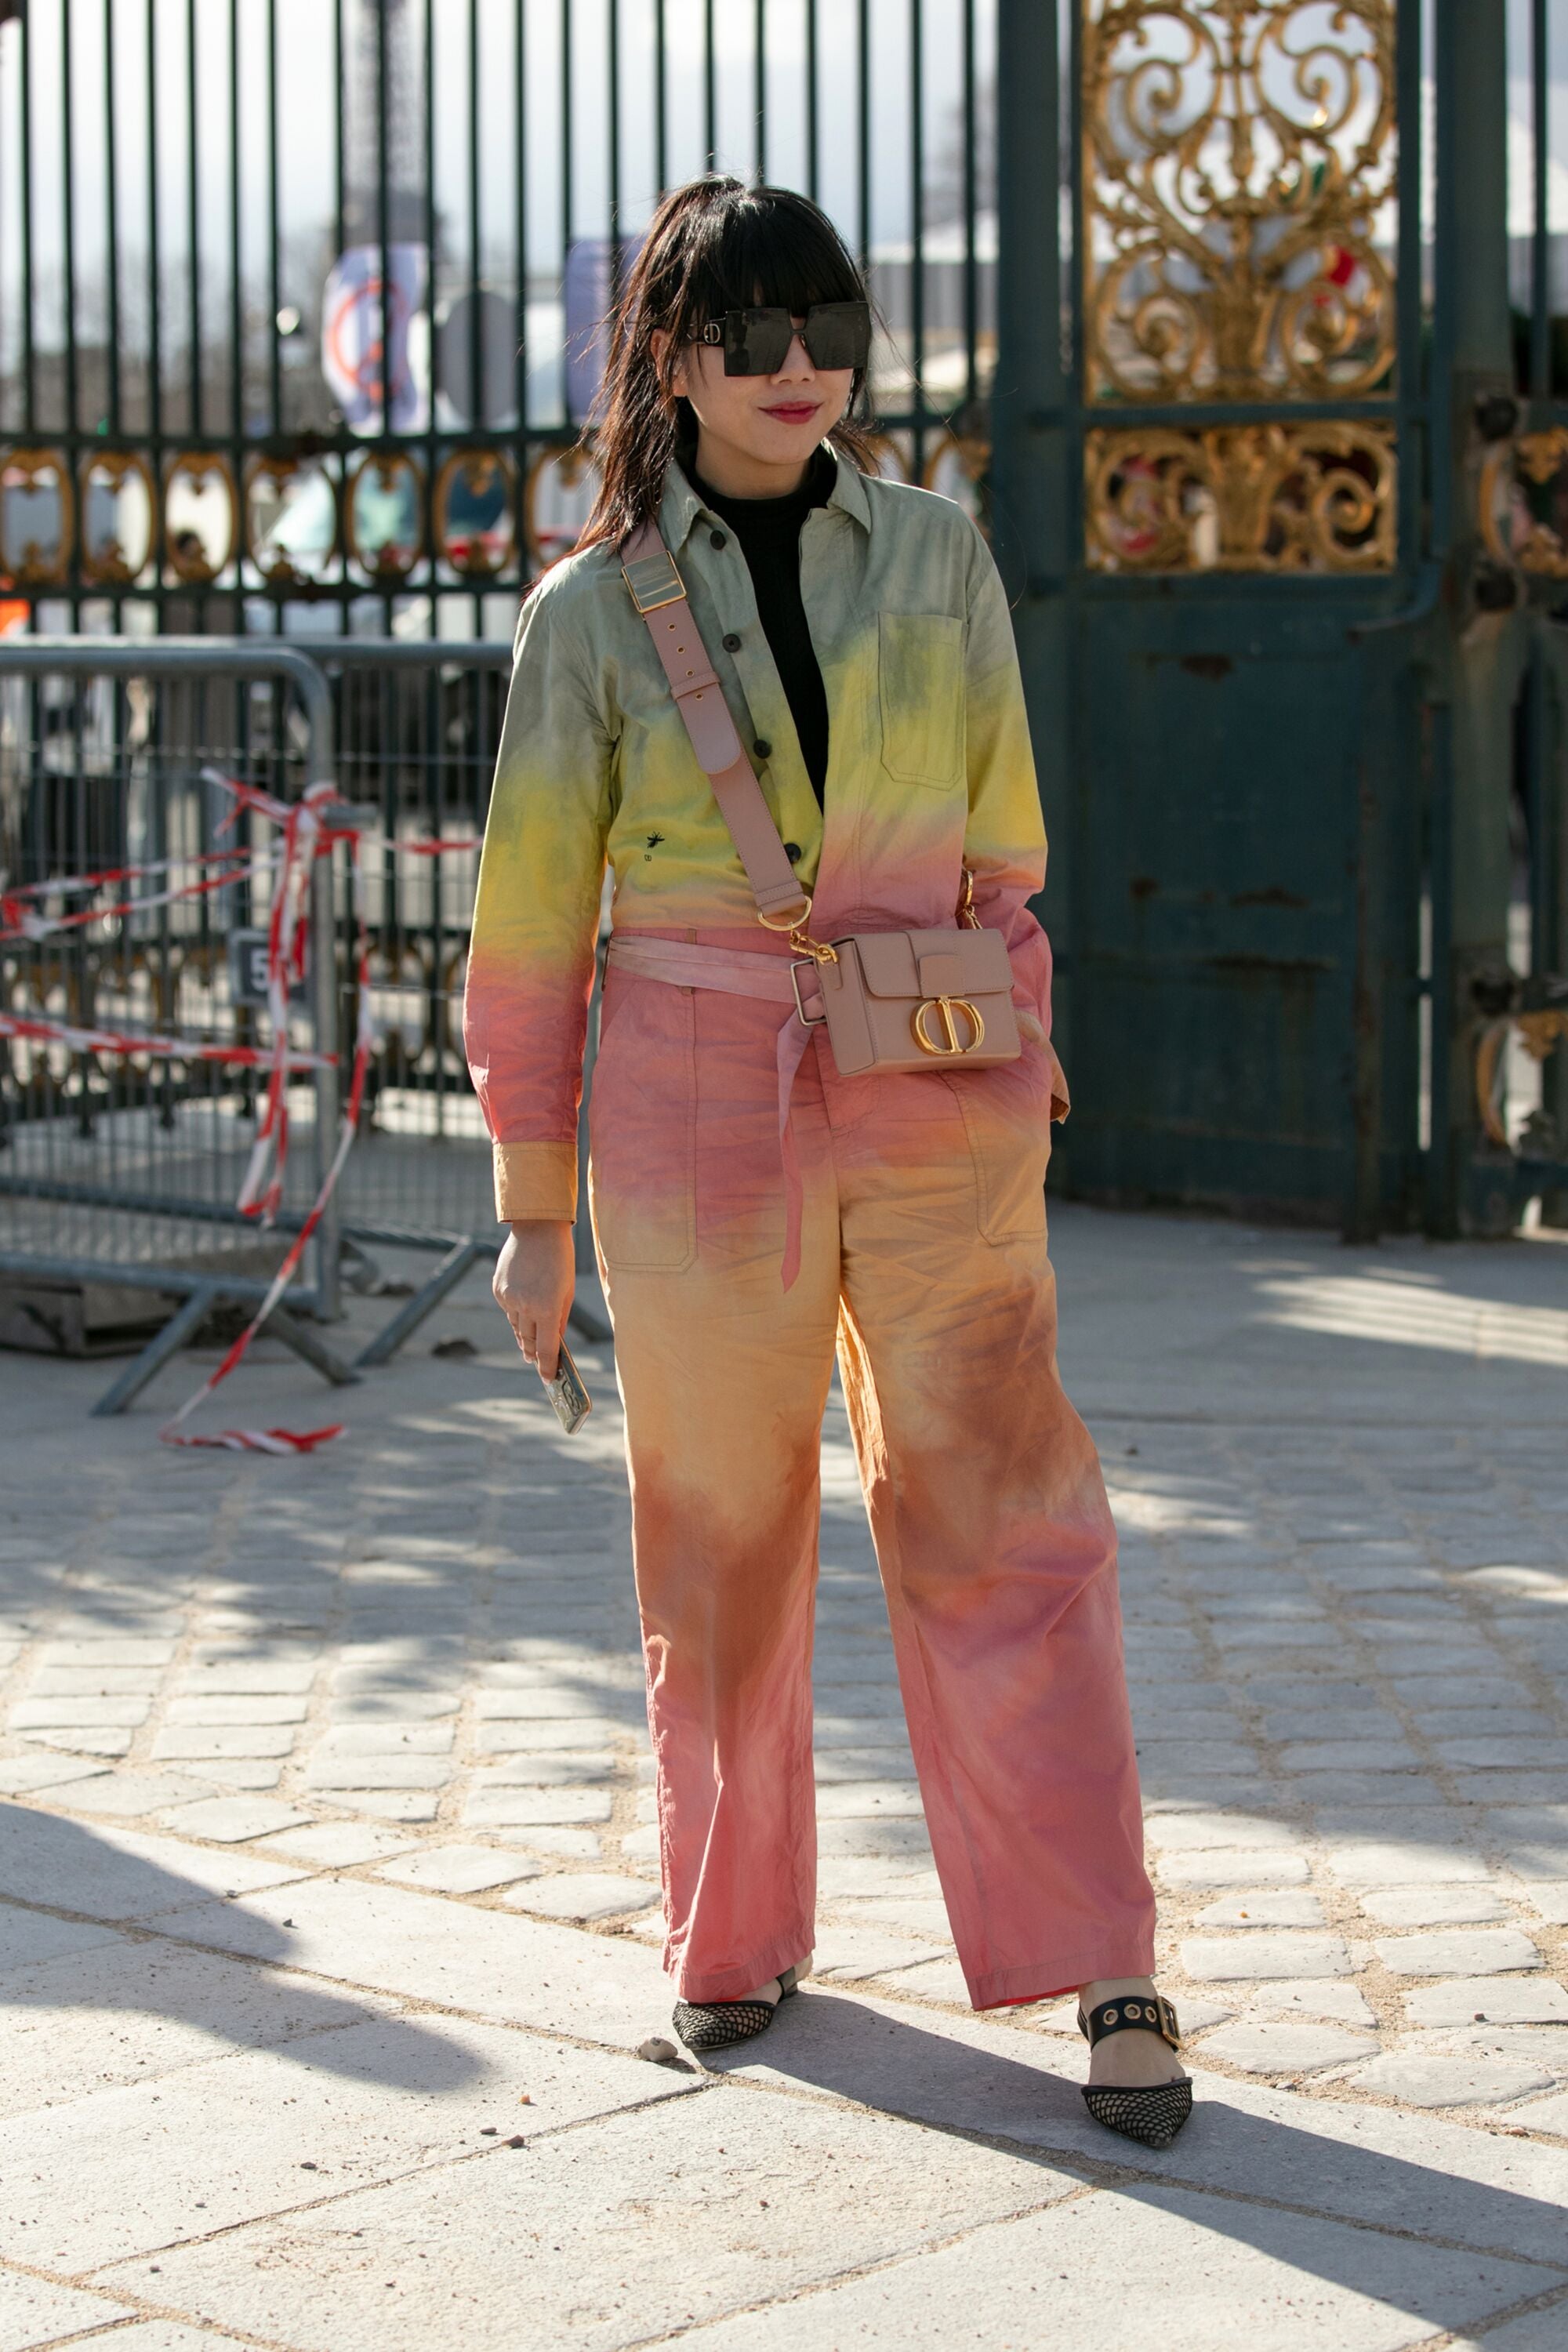 Styling Tips For Jumpsuits From Paris Street Style